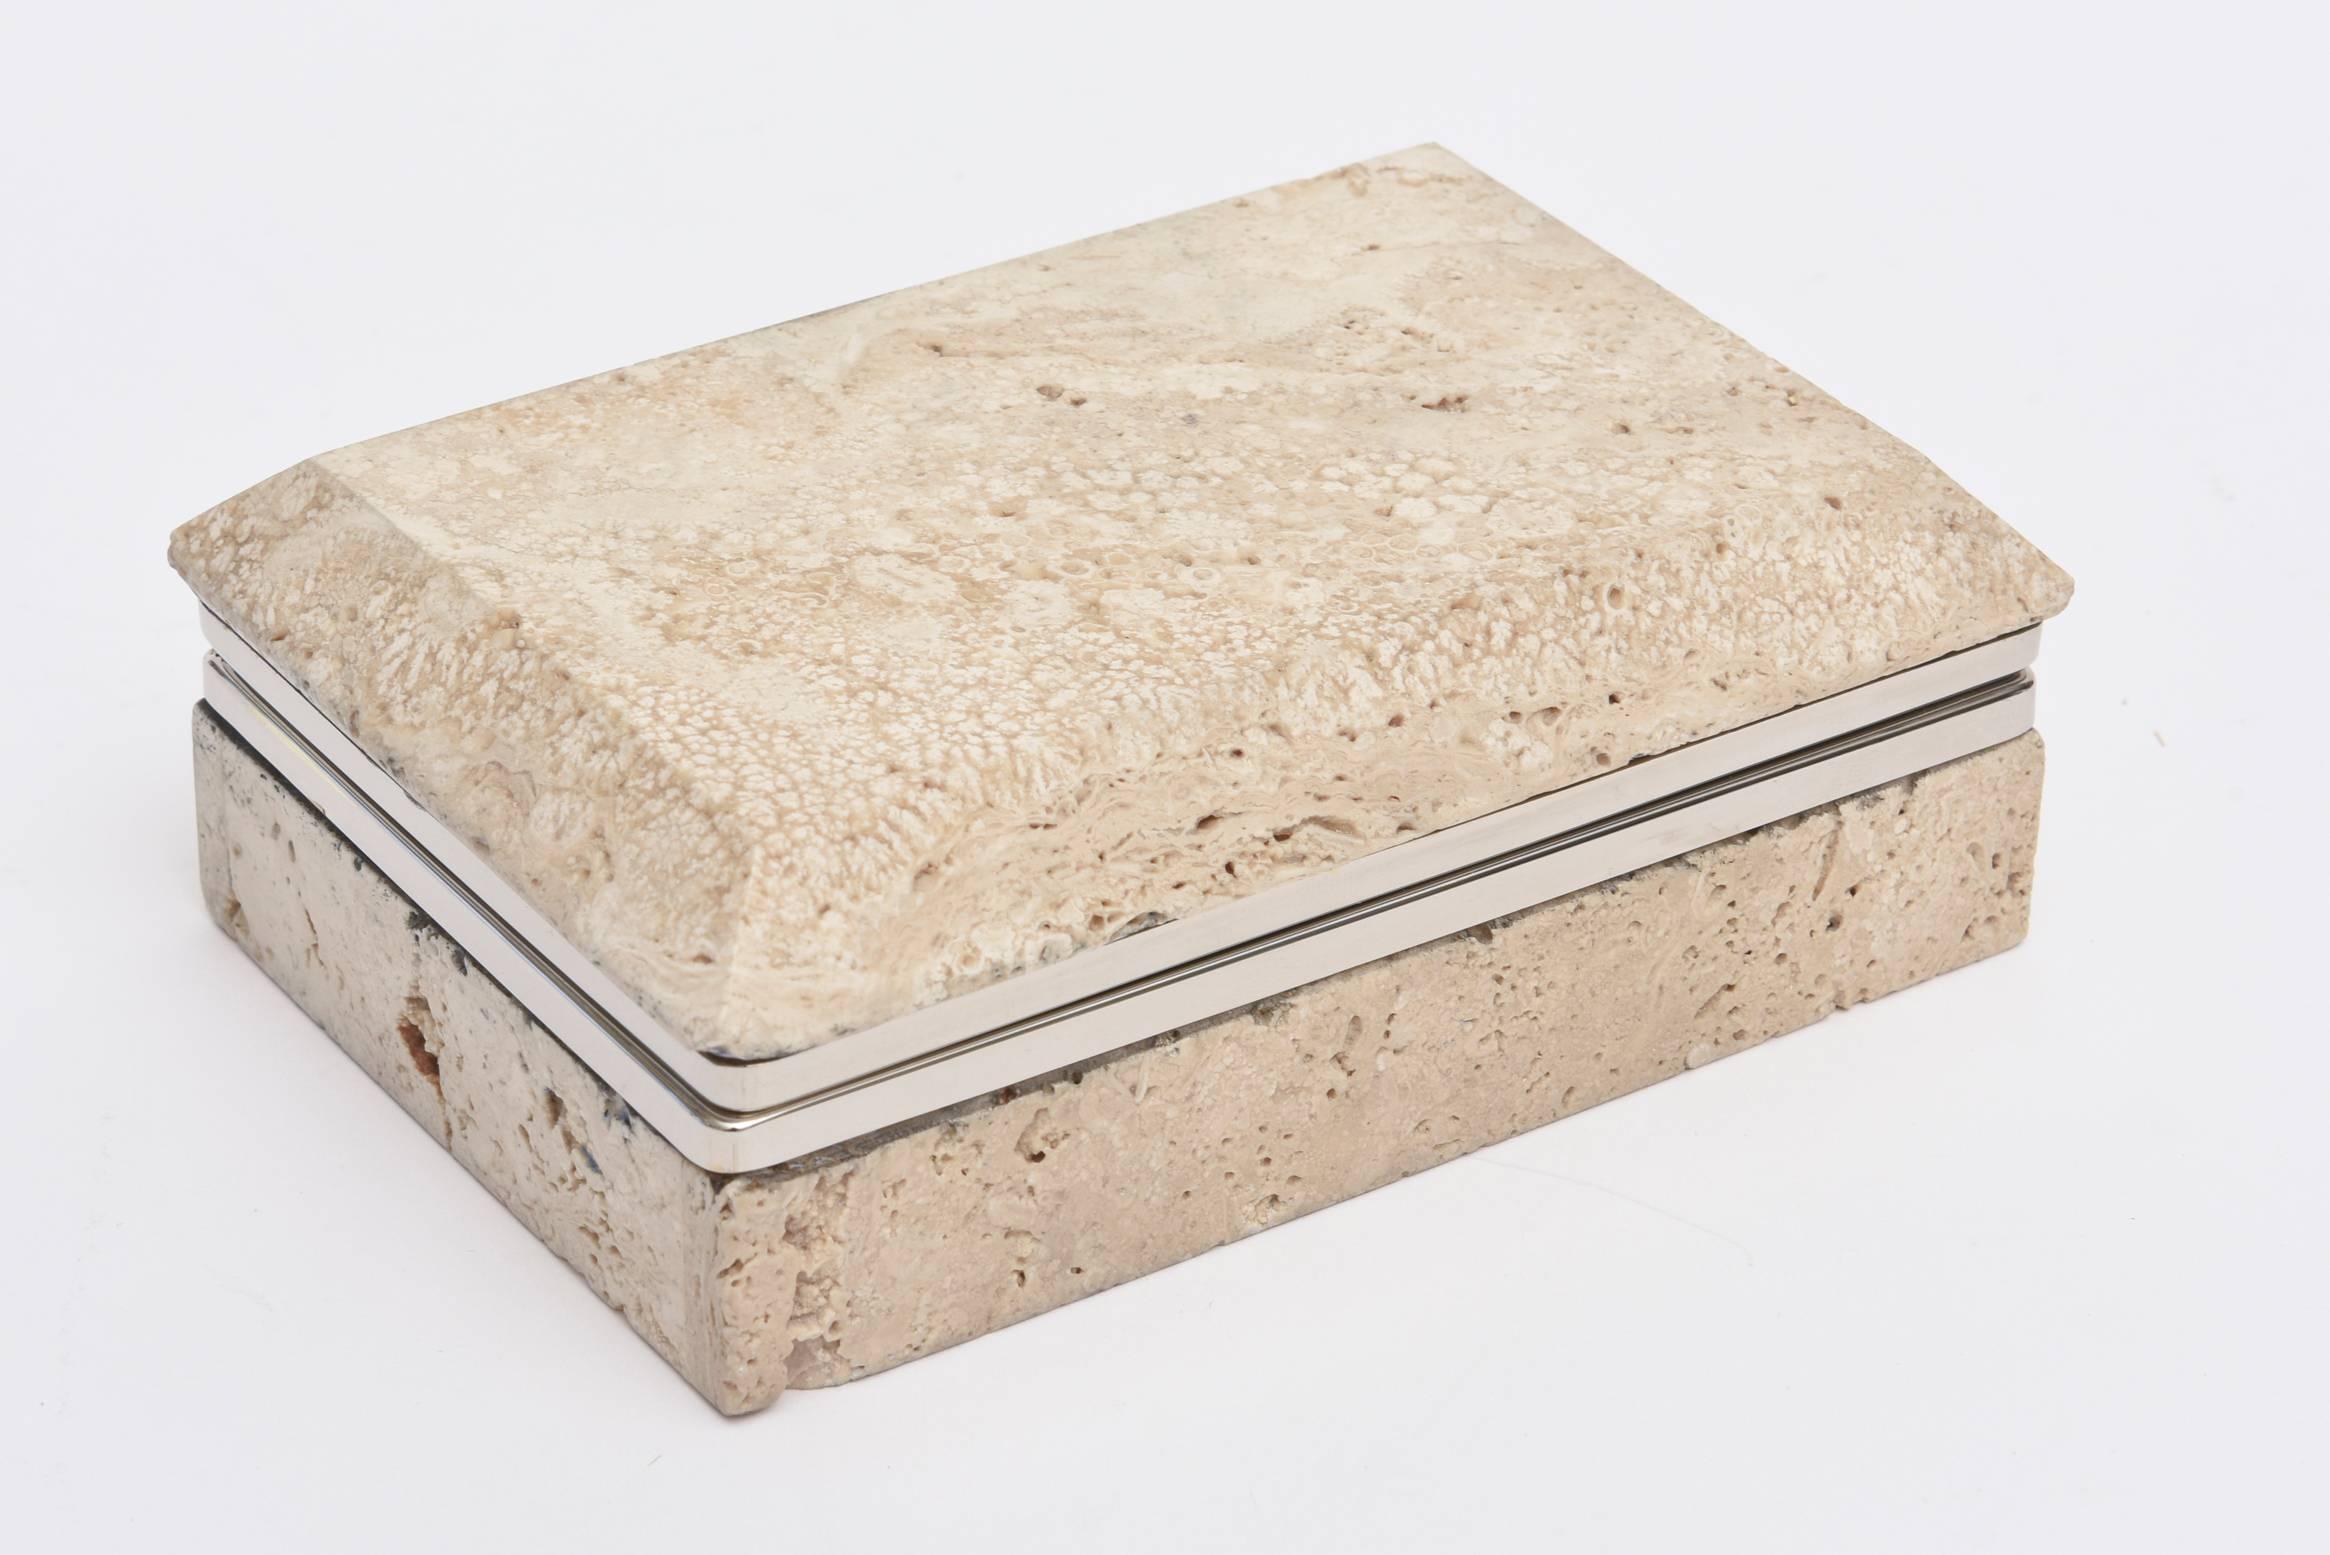 This vintage organic modern Italian travertine stone and nickel silver hinged box is a great desk accessory and or cocktail table. The metal has been polished. It is from the 1970s. The travertine has natural craters in it and on the front it looks